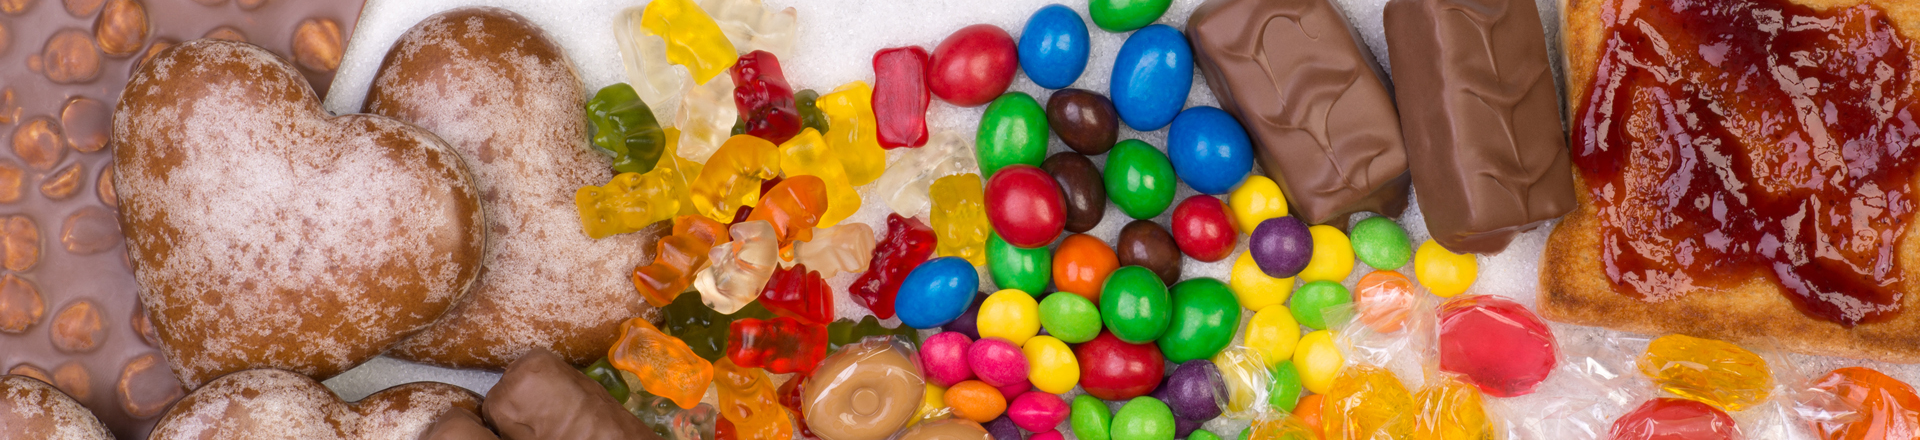 pile of colorful sugary candies